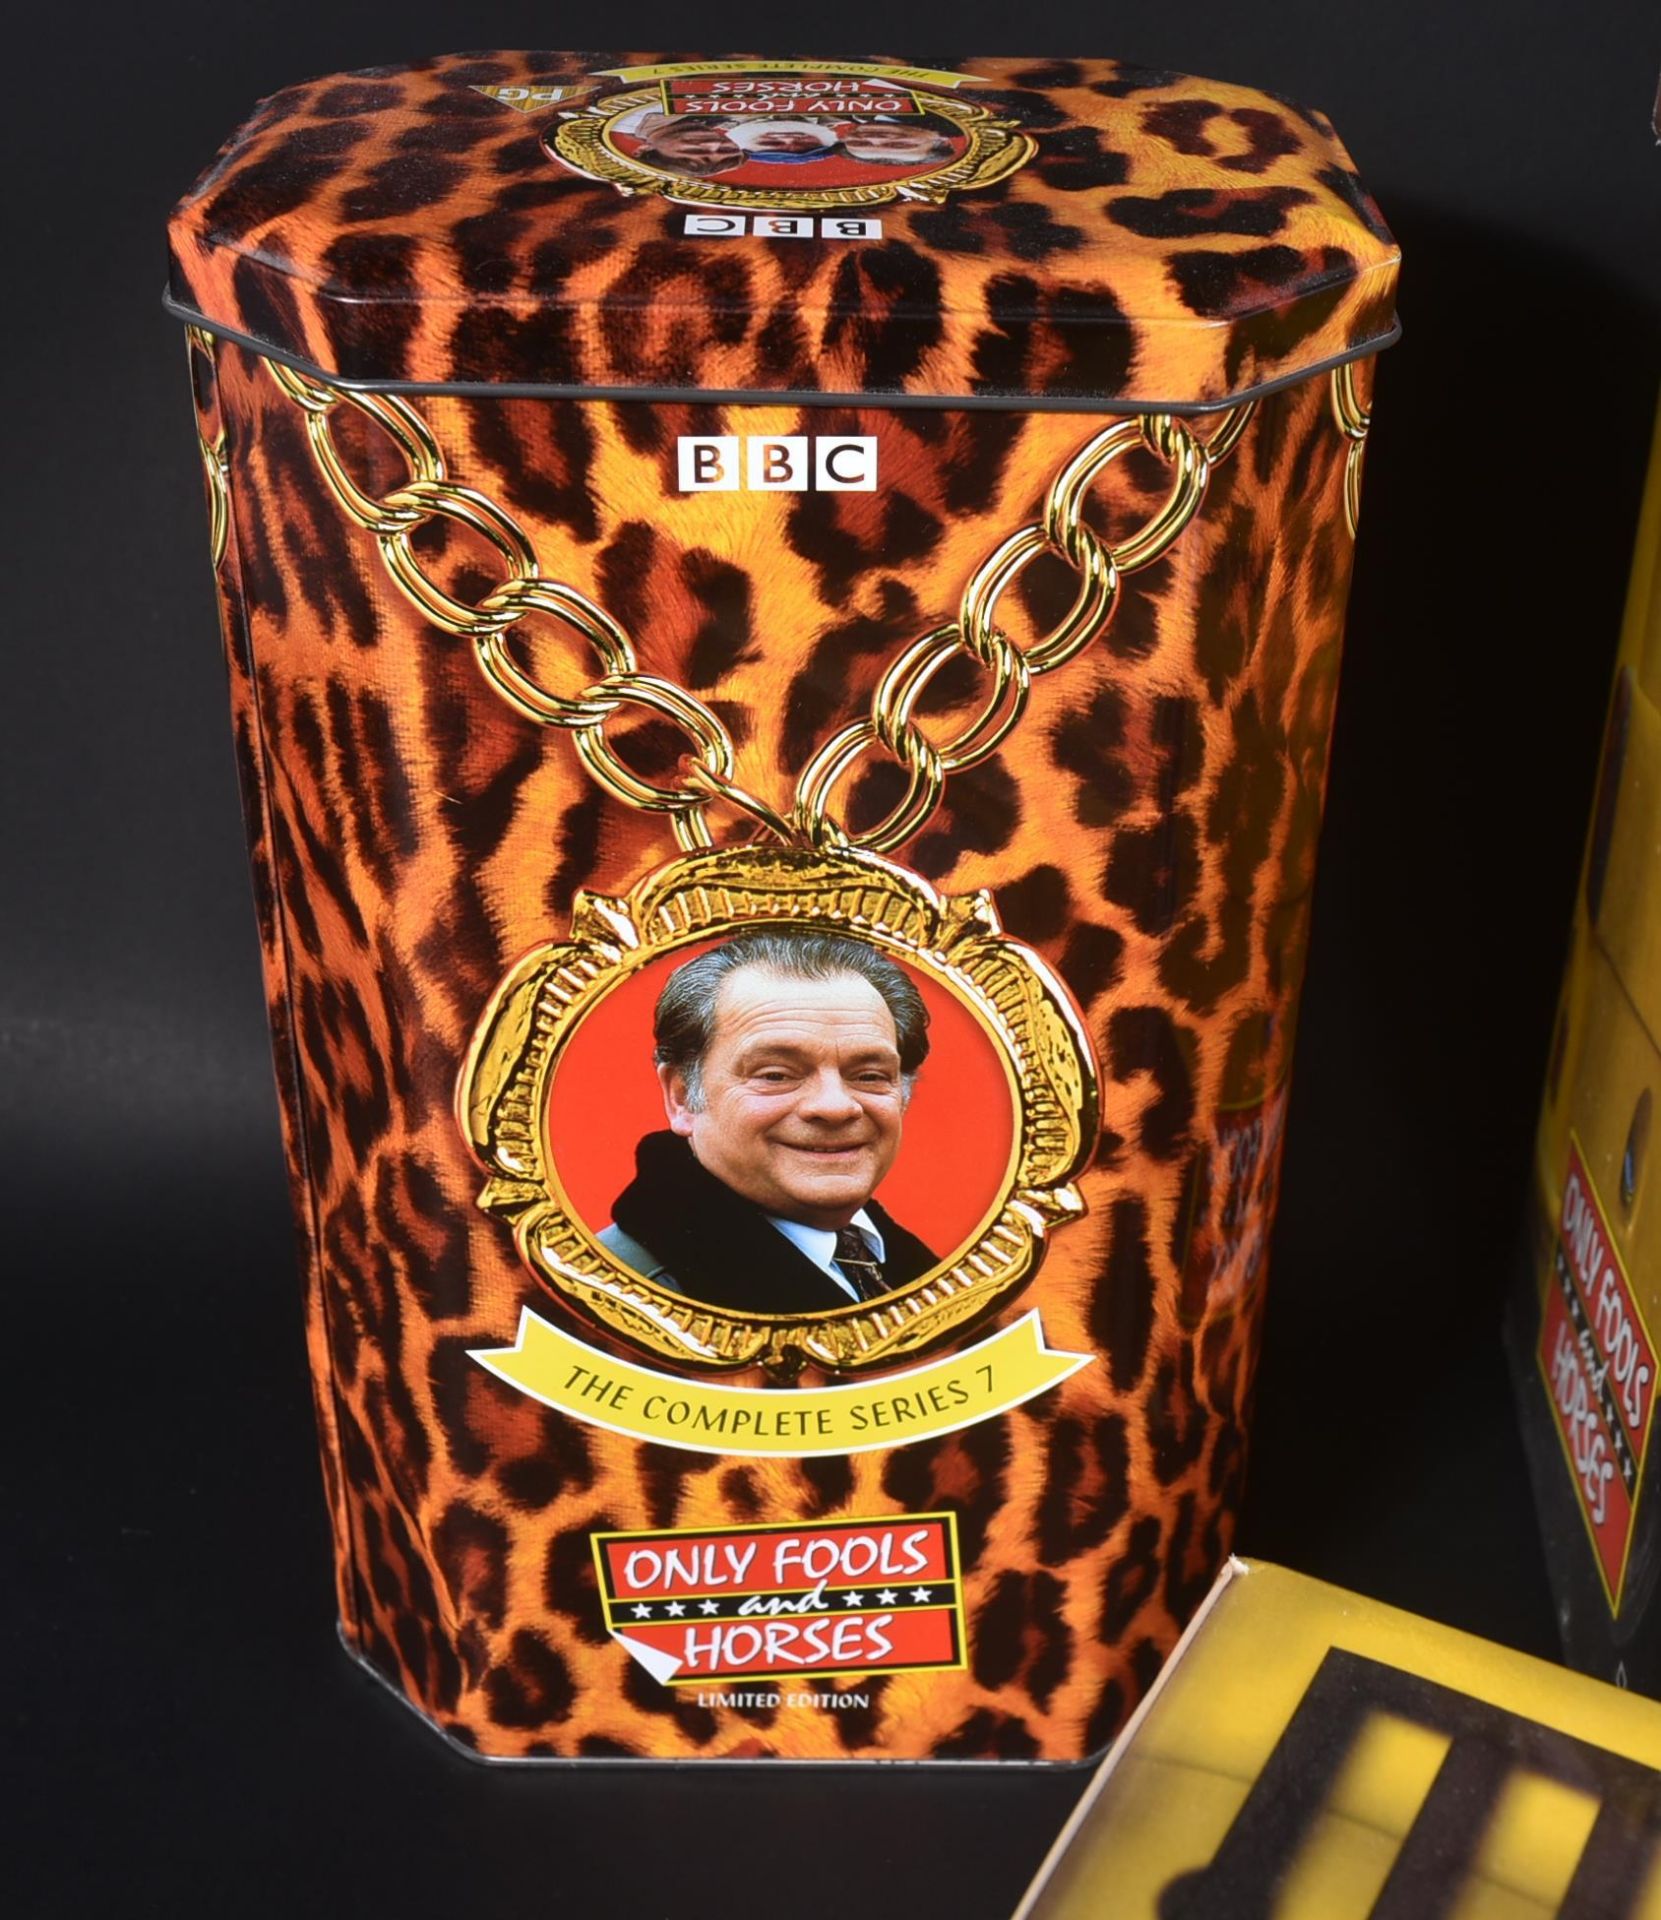 ONLY FOOLS & HORSES - SELECTED VHS BBC BOXED SETS - Image 2 of 7